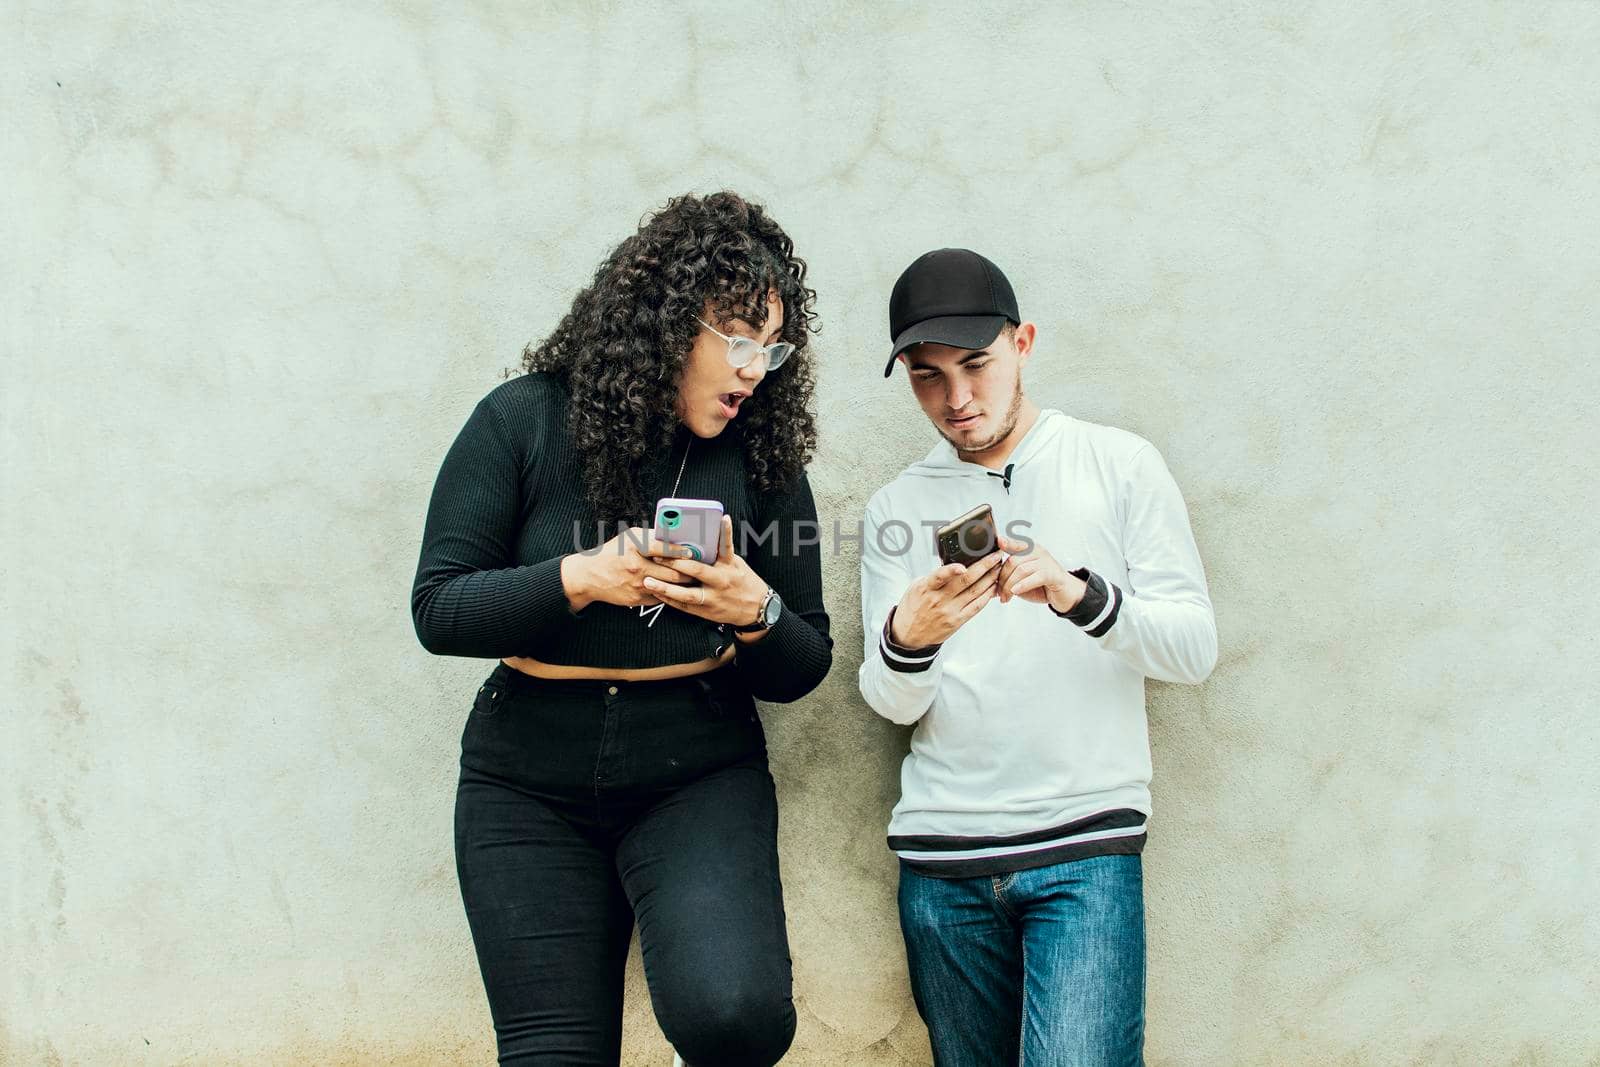 Two teenagers together checking their cell phones, Two smiling friends checking their cell phones, Two teenage friends checking their cell phones and smiling, Guy and girl leaning on a wall checking their cell phones